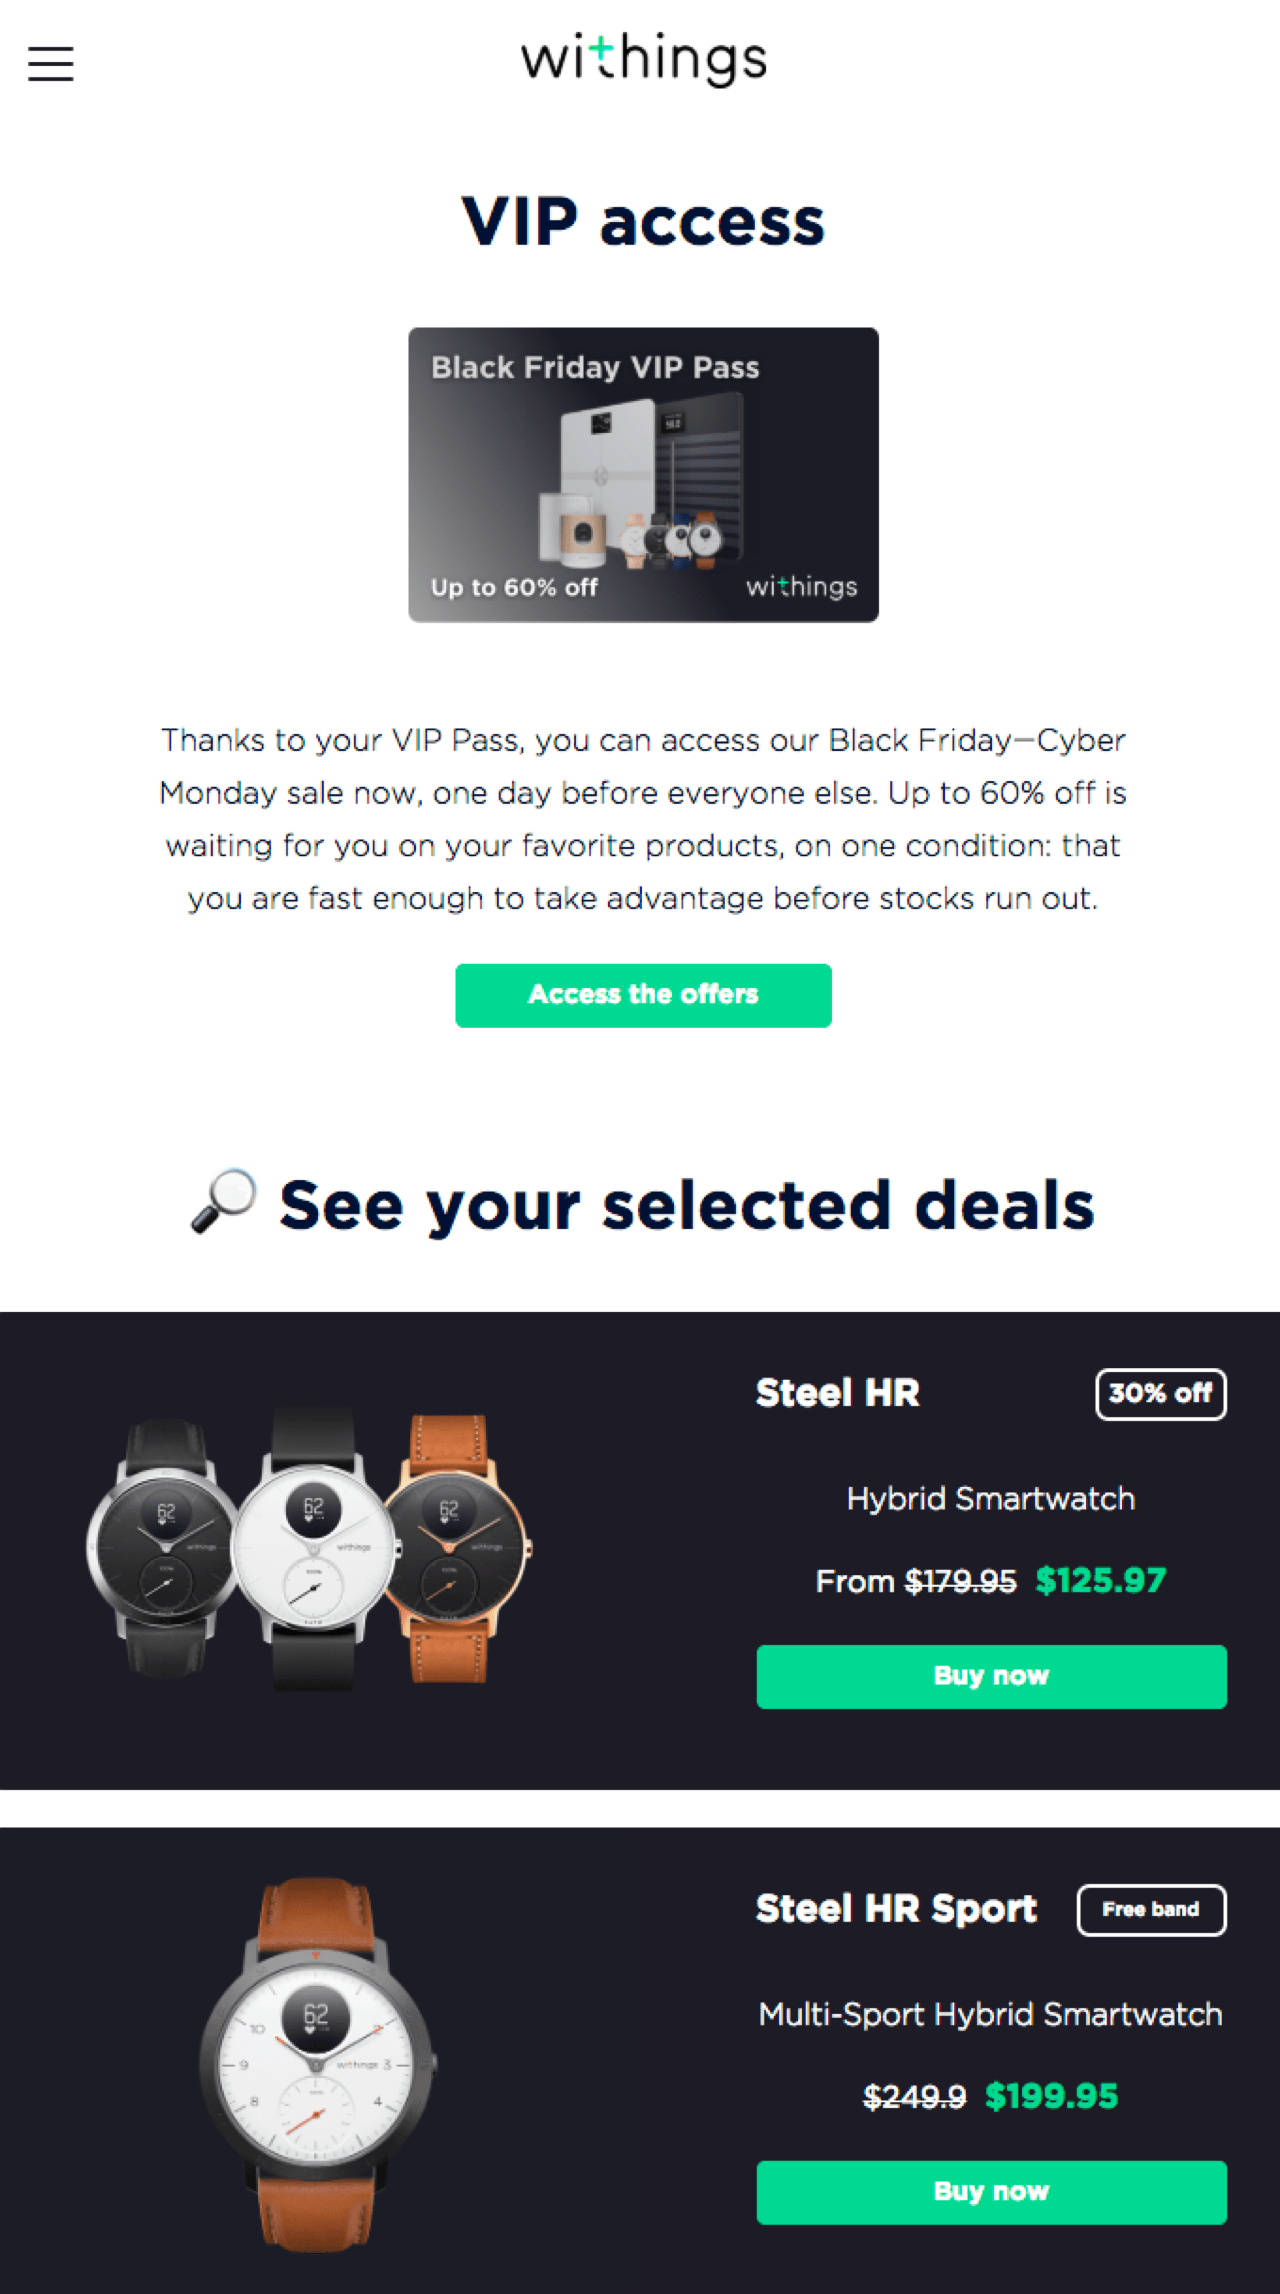 Withings Black Friday email example VIP access deals